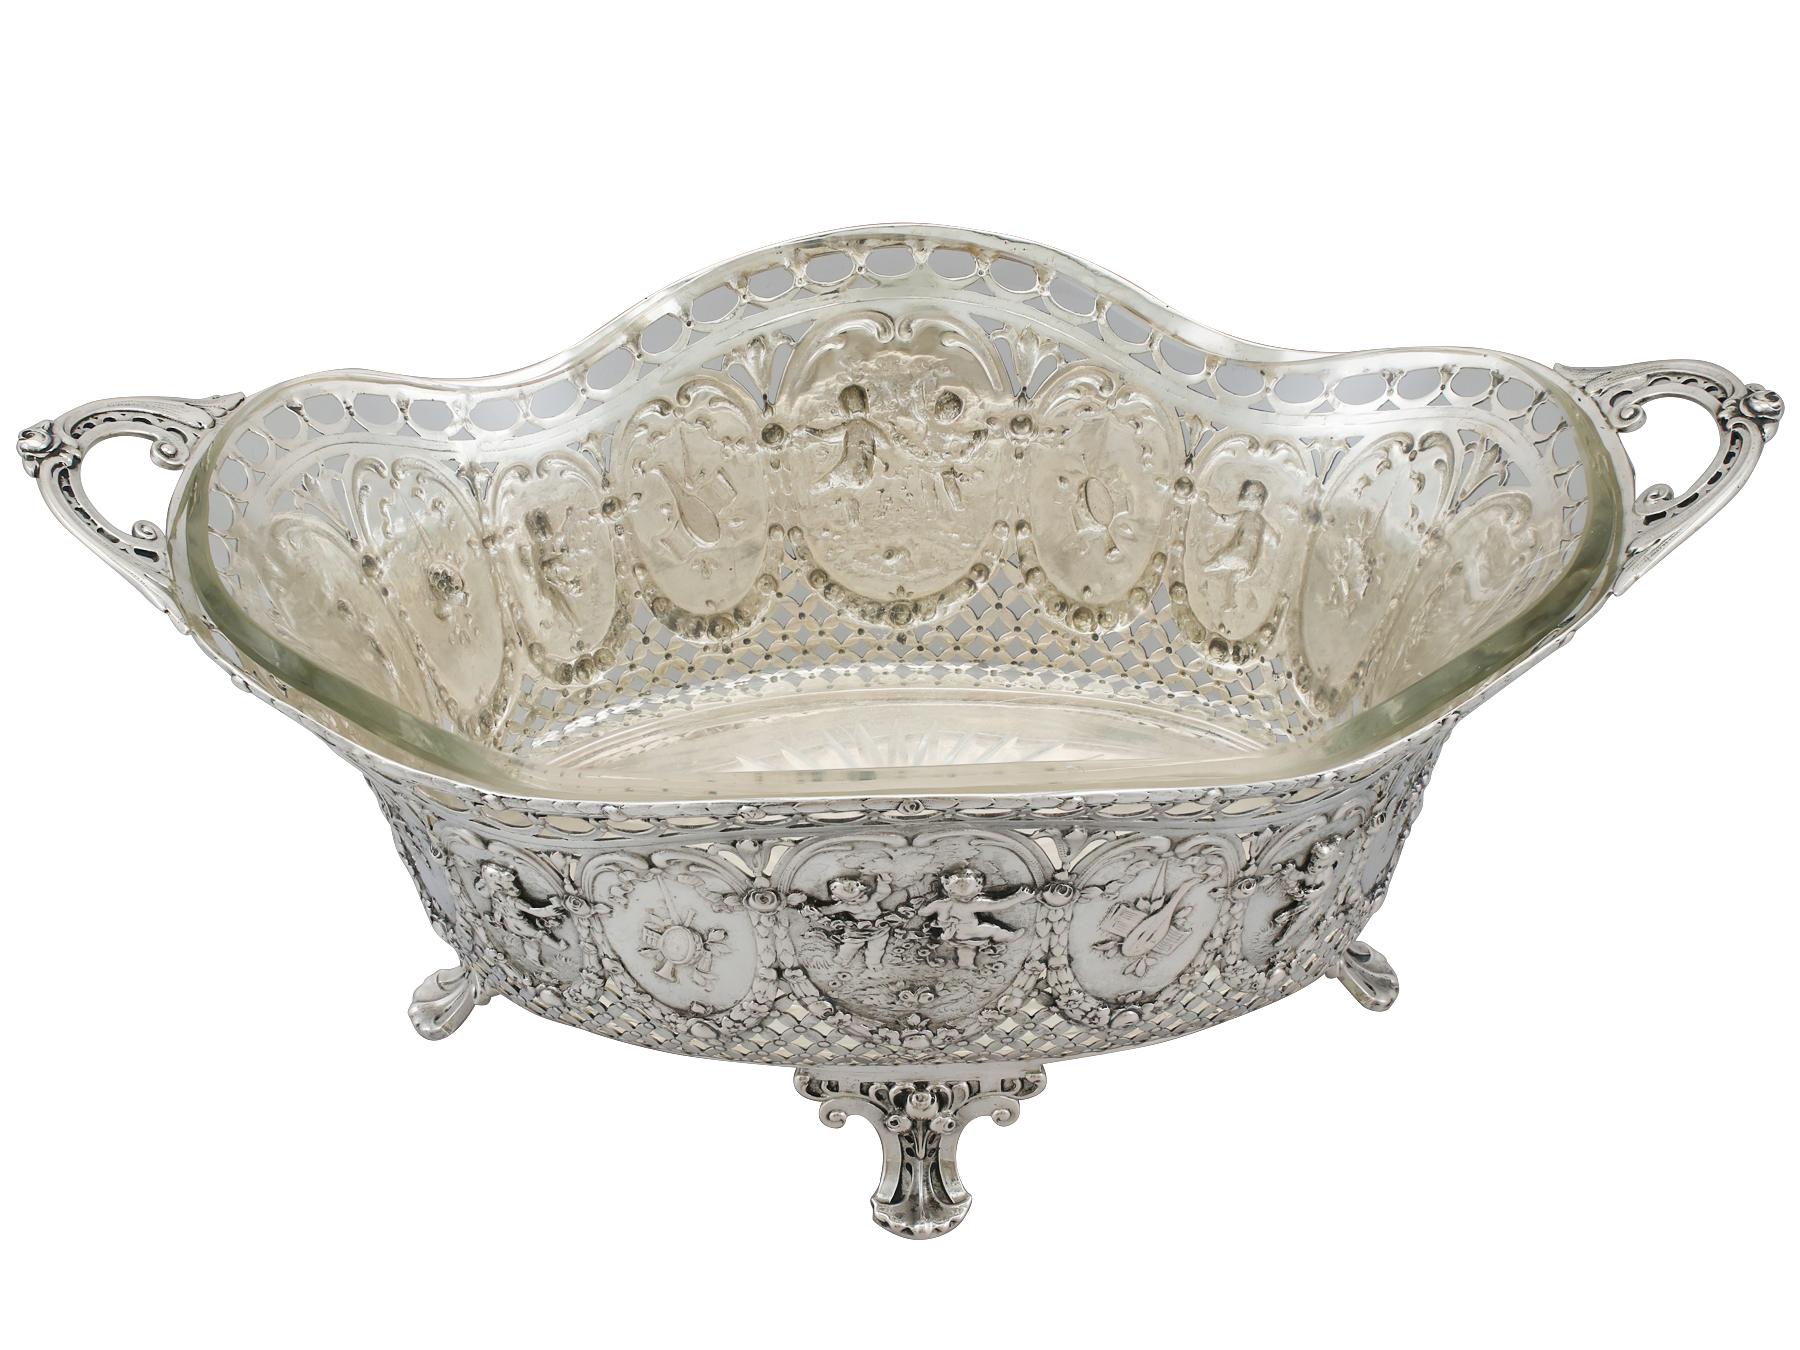 Early 20th Century Antique Italian Silver and Glass Centrepiece or Basket